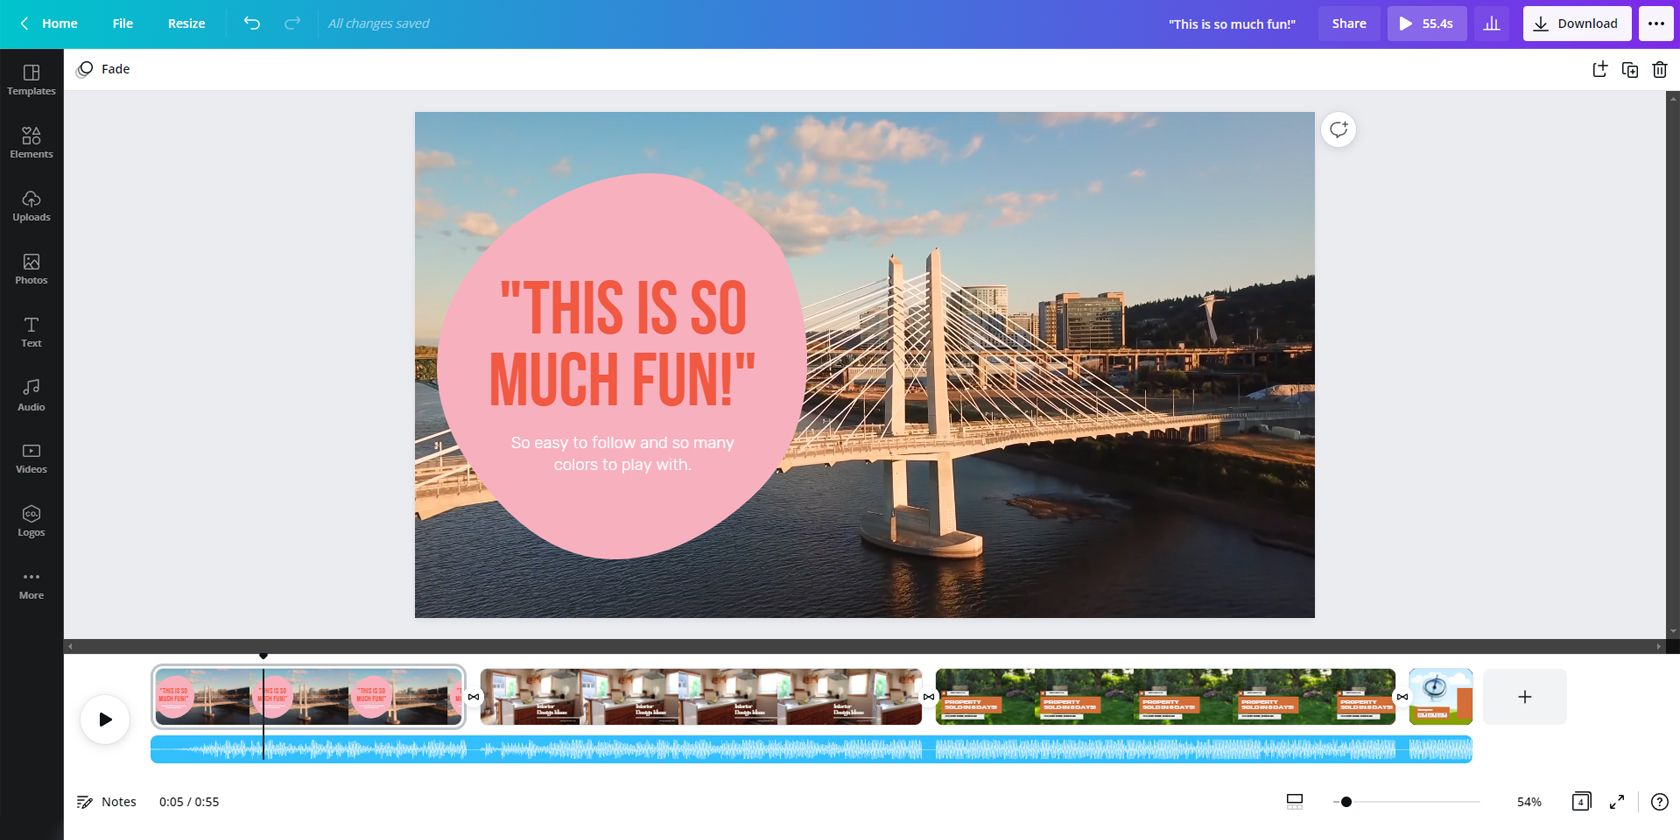 How to ADD Videos and Pictures over other Video in Canva